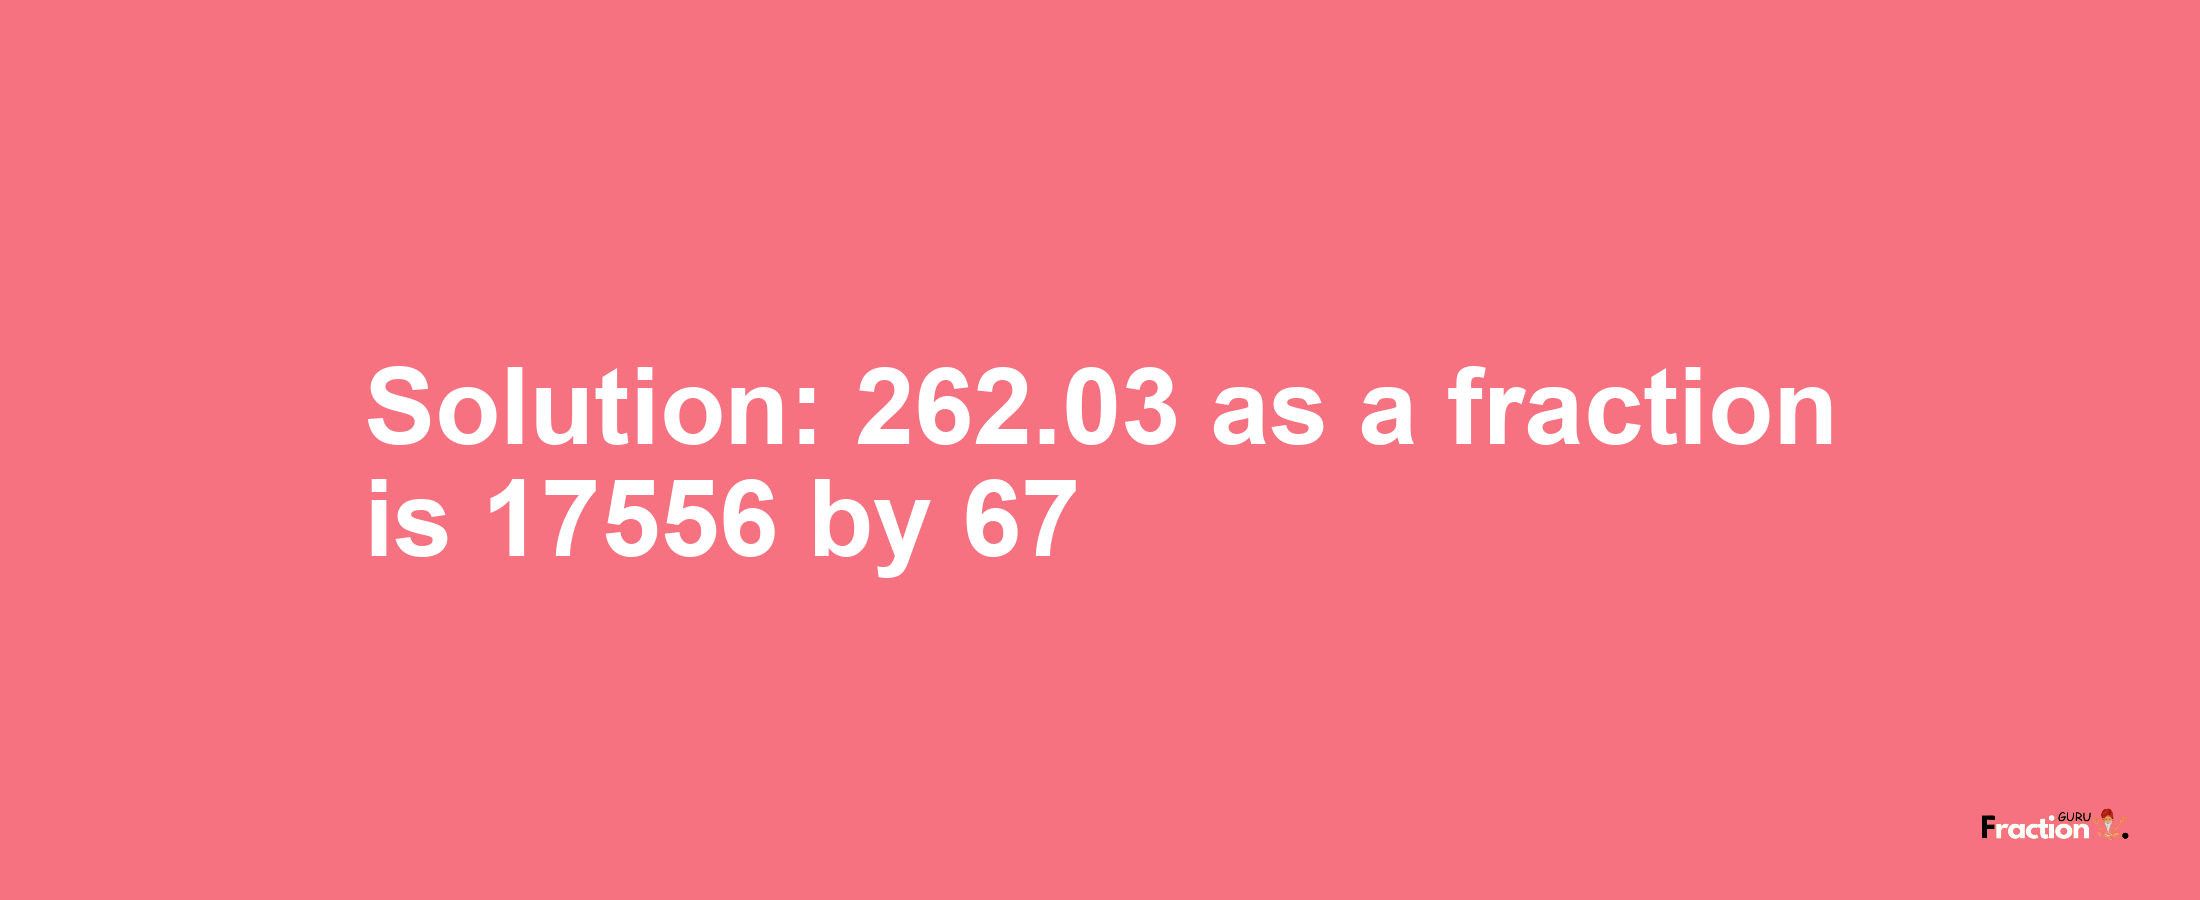 Solution:262.03 as a fraction is 17556/67